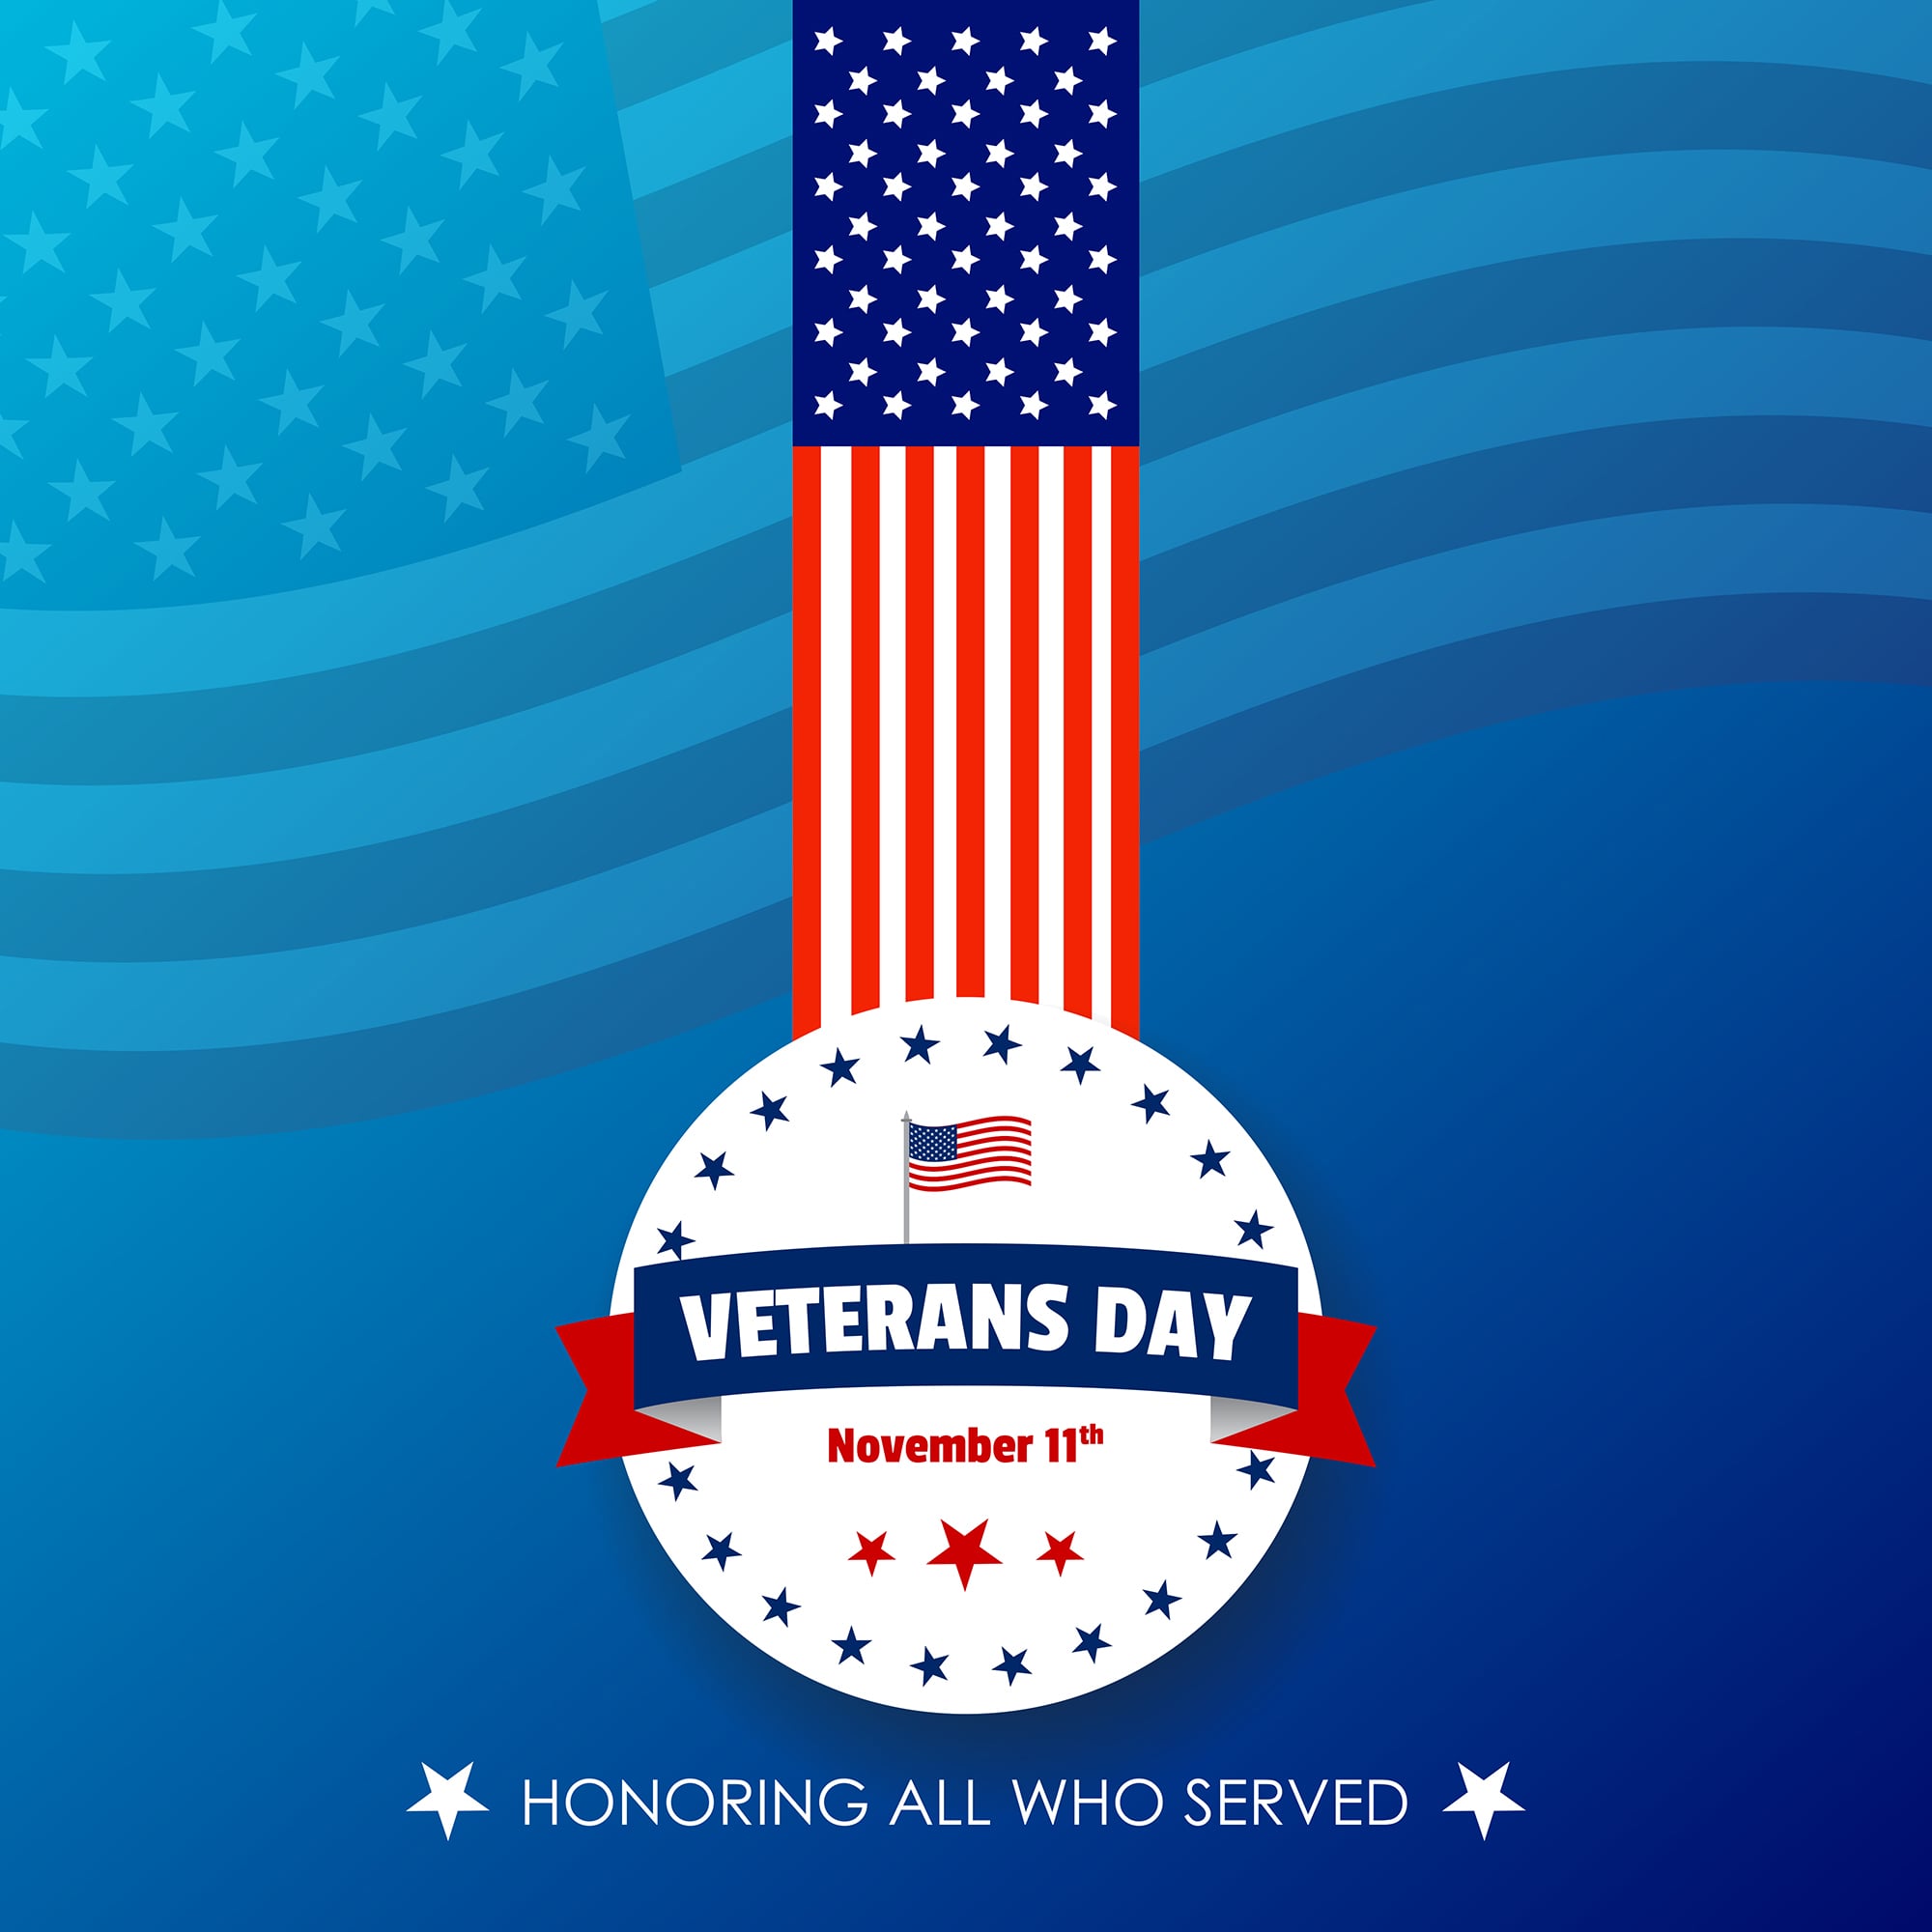 Veterans Day free vector graphics with the quote "Honoring all who Served"